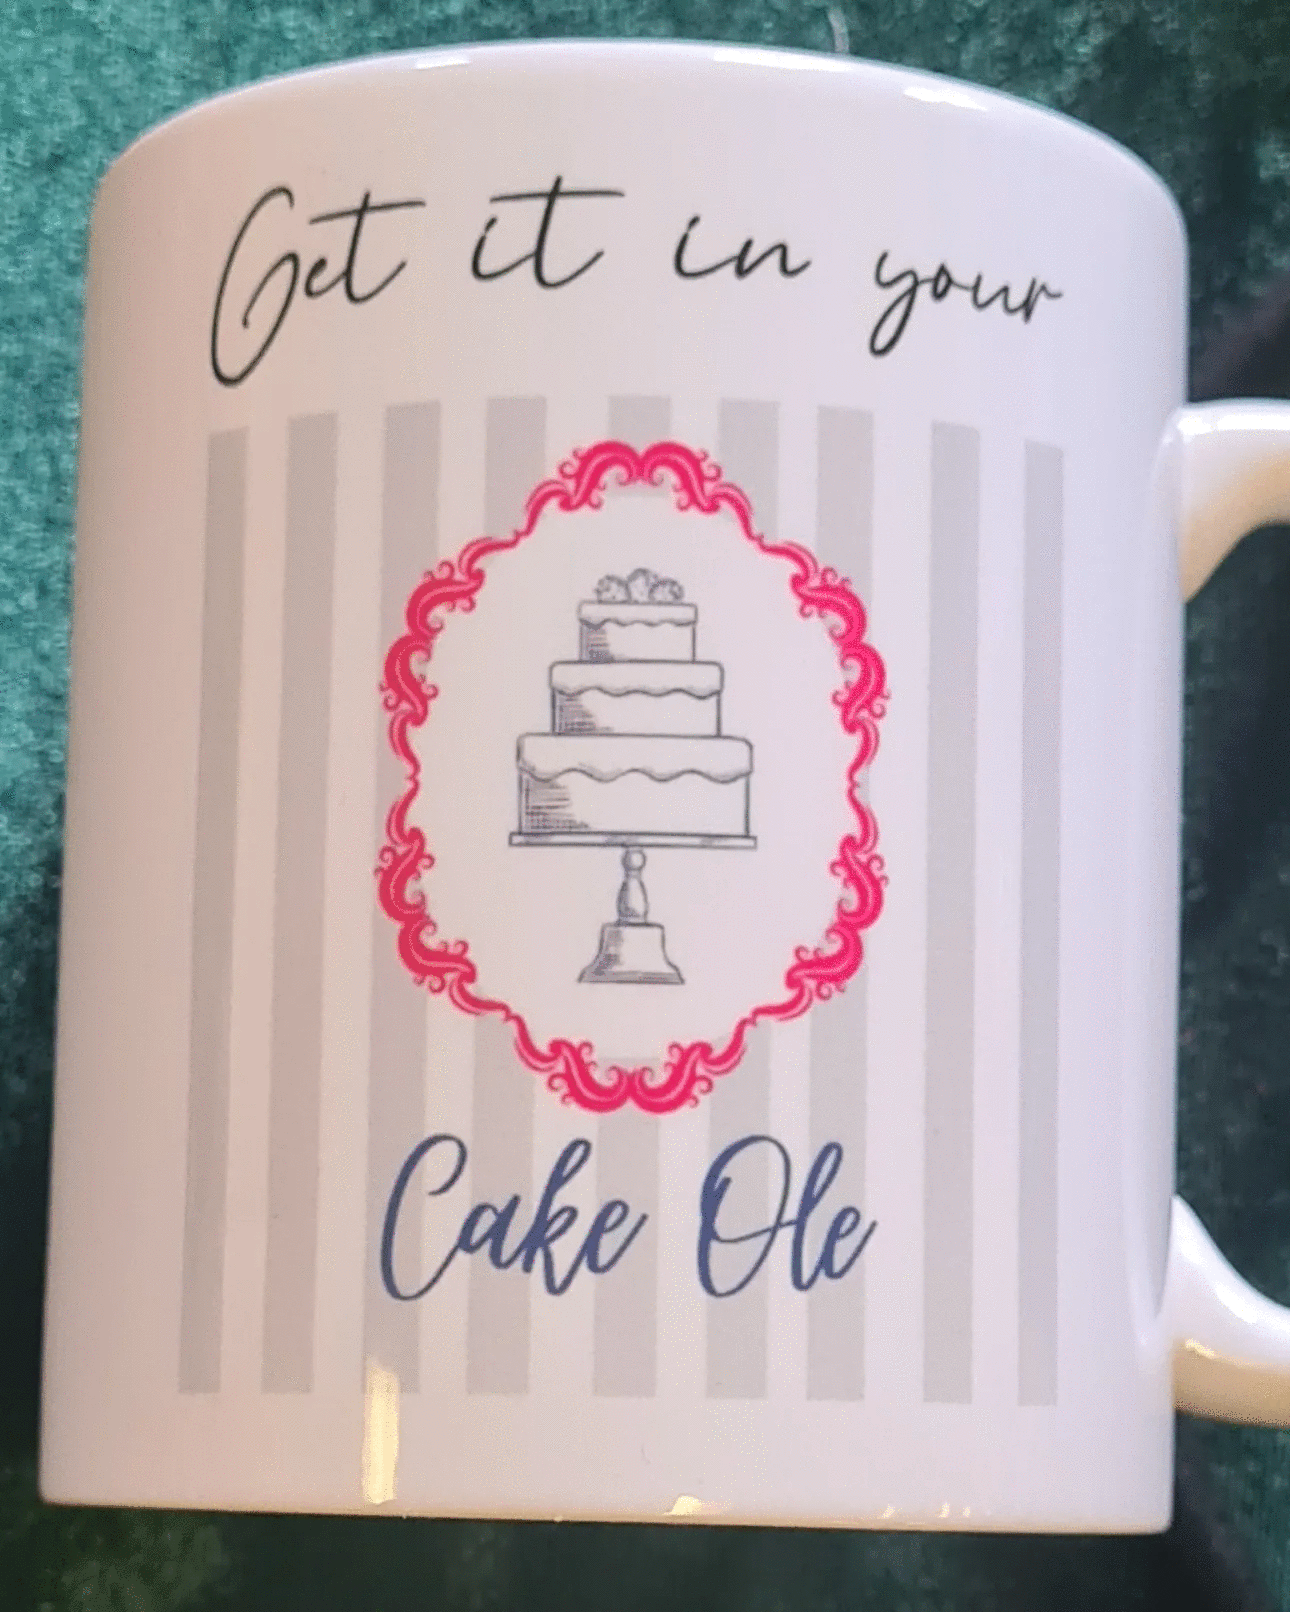 Get it in your Cake Ole mug